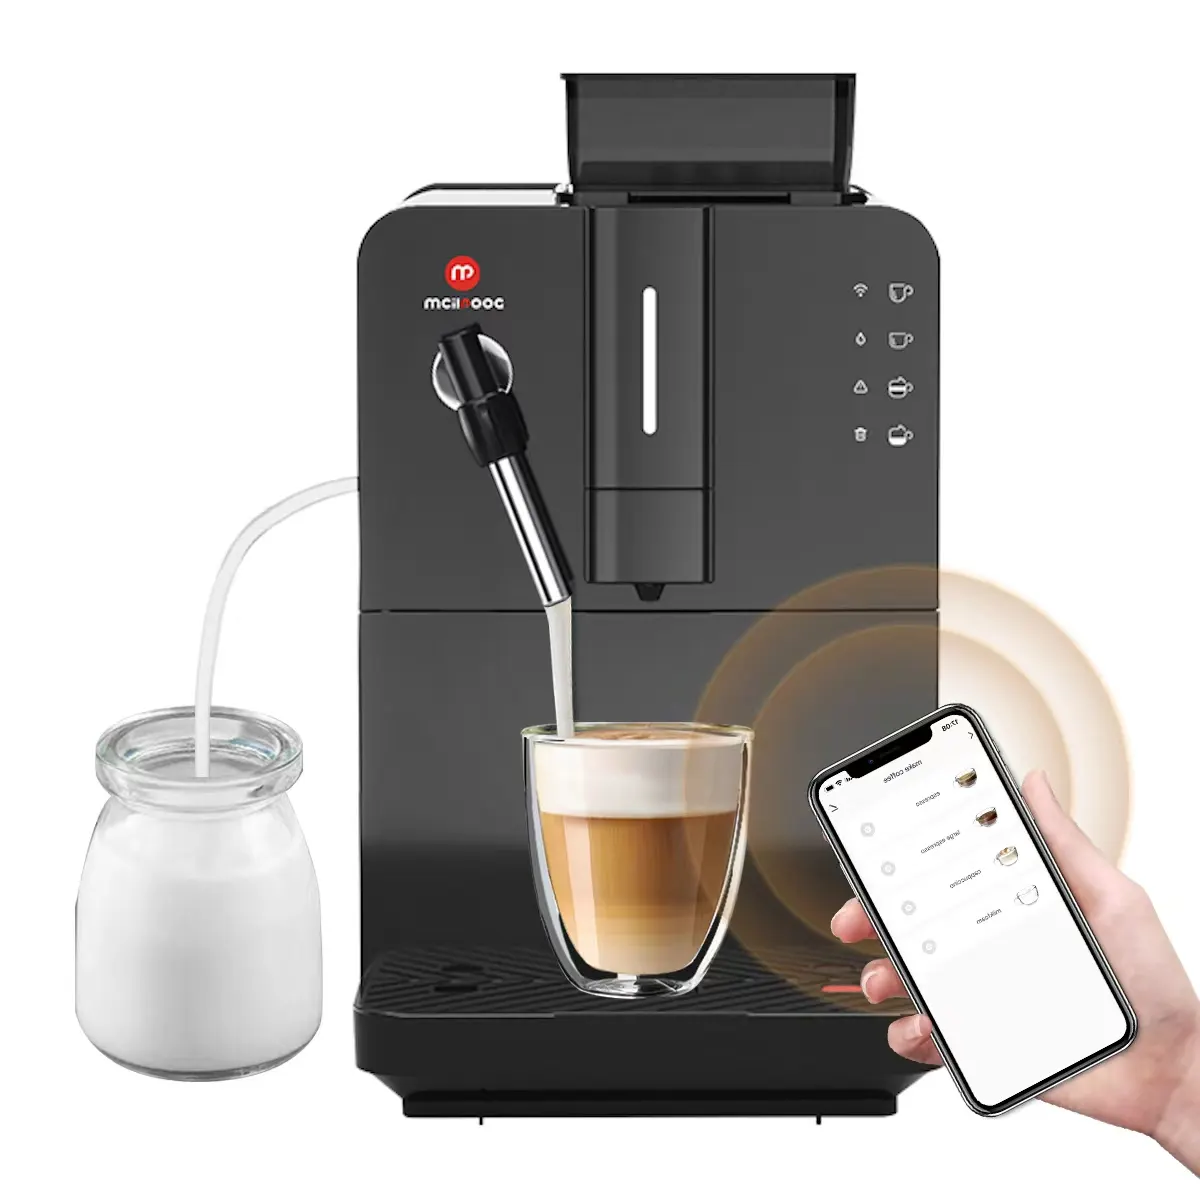 New One-touch Cappuccino latte function Fully Automatic Coffee machine